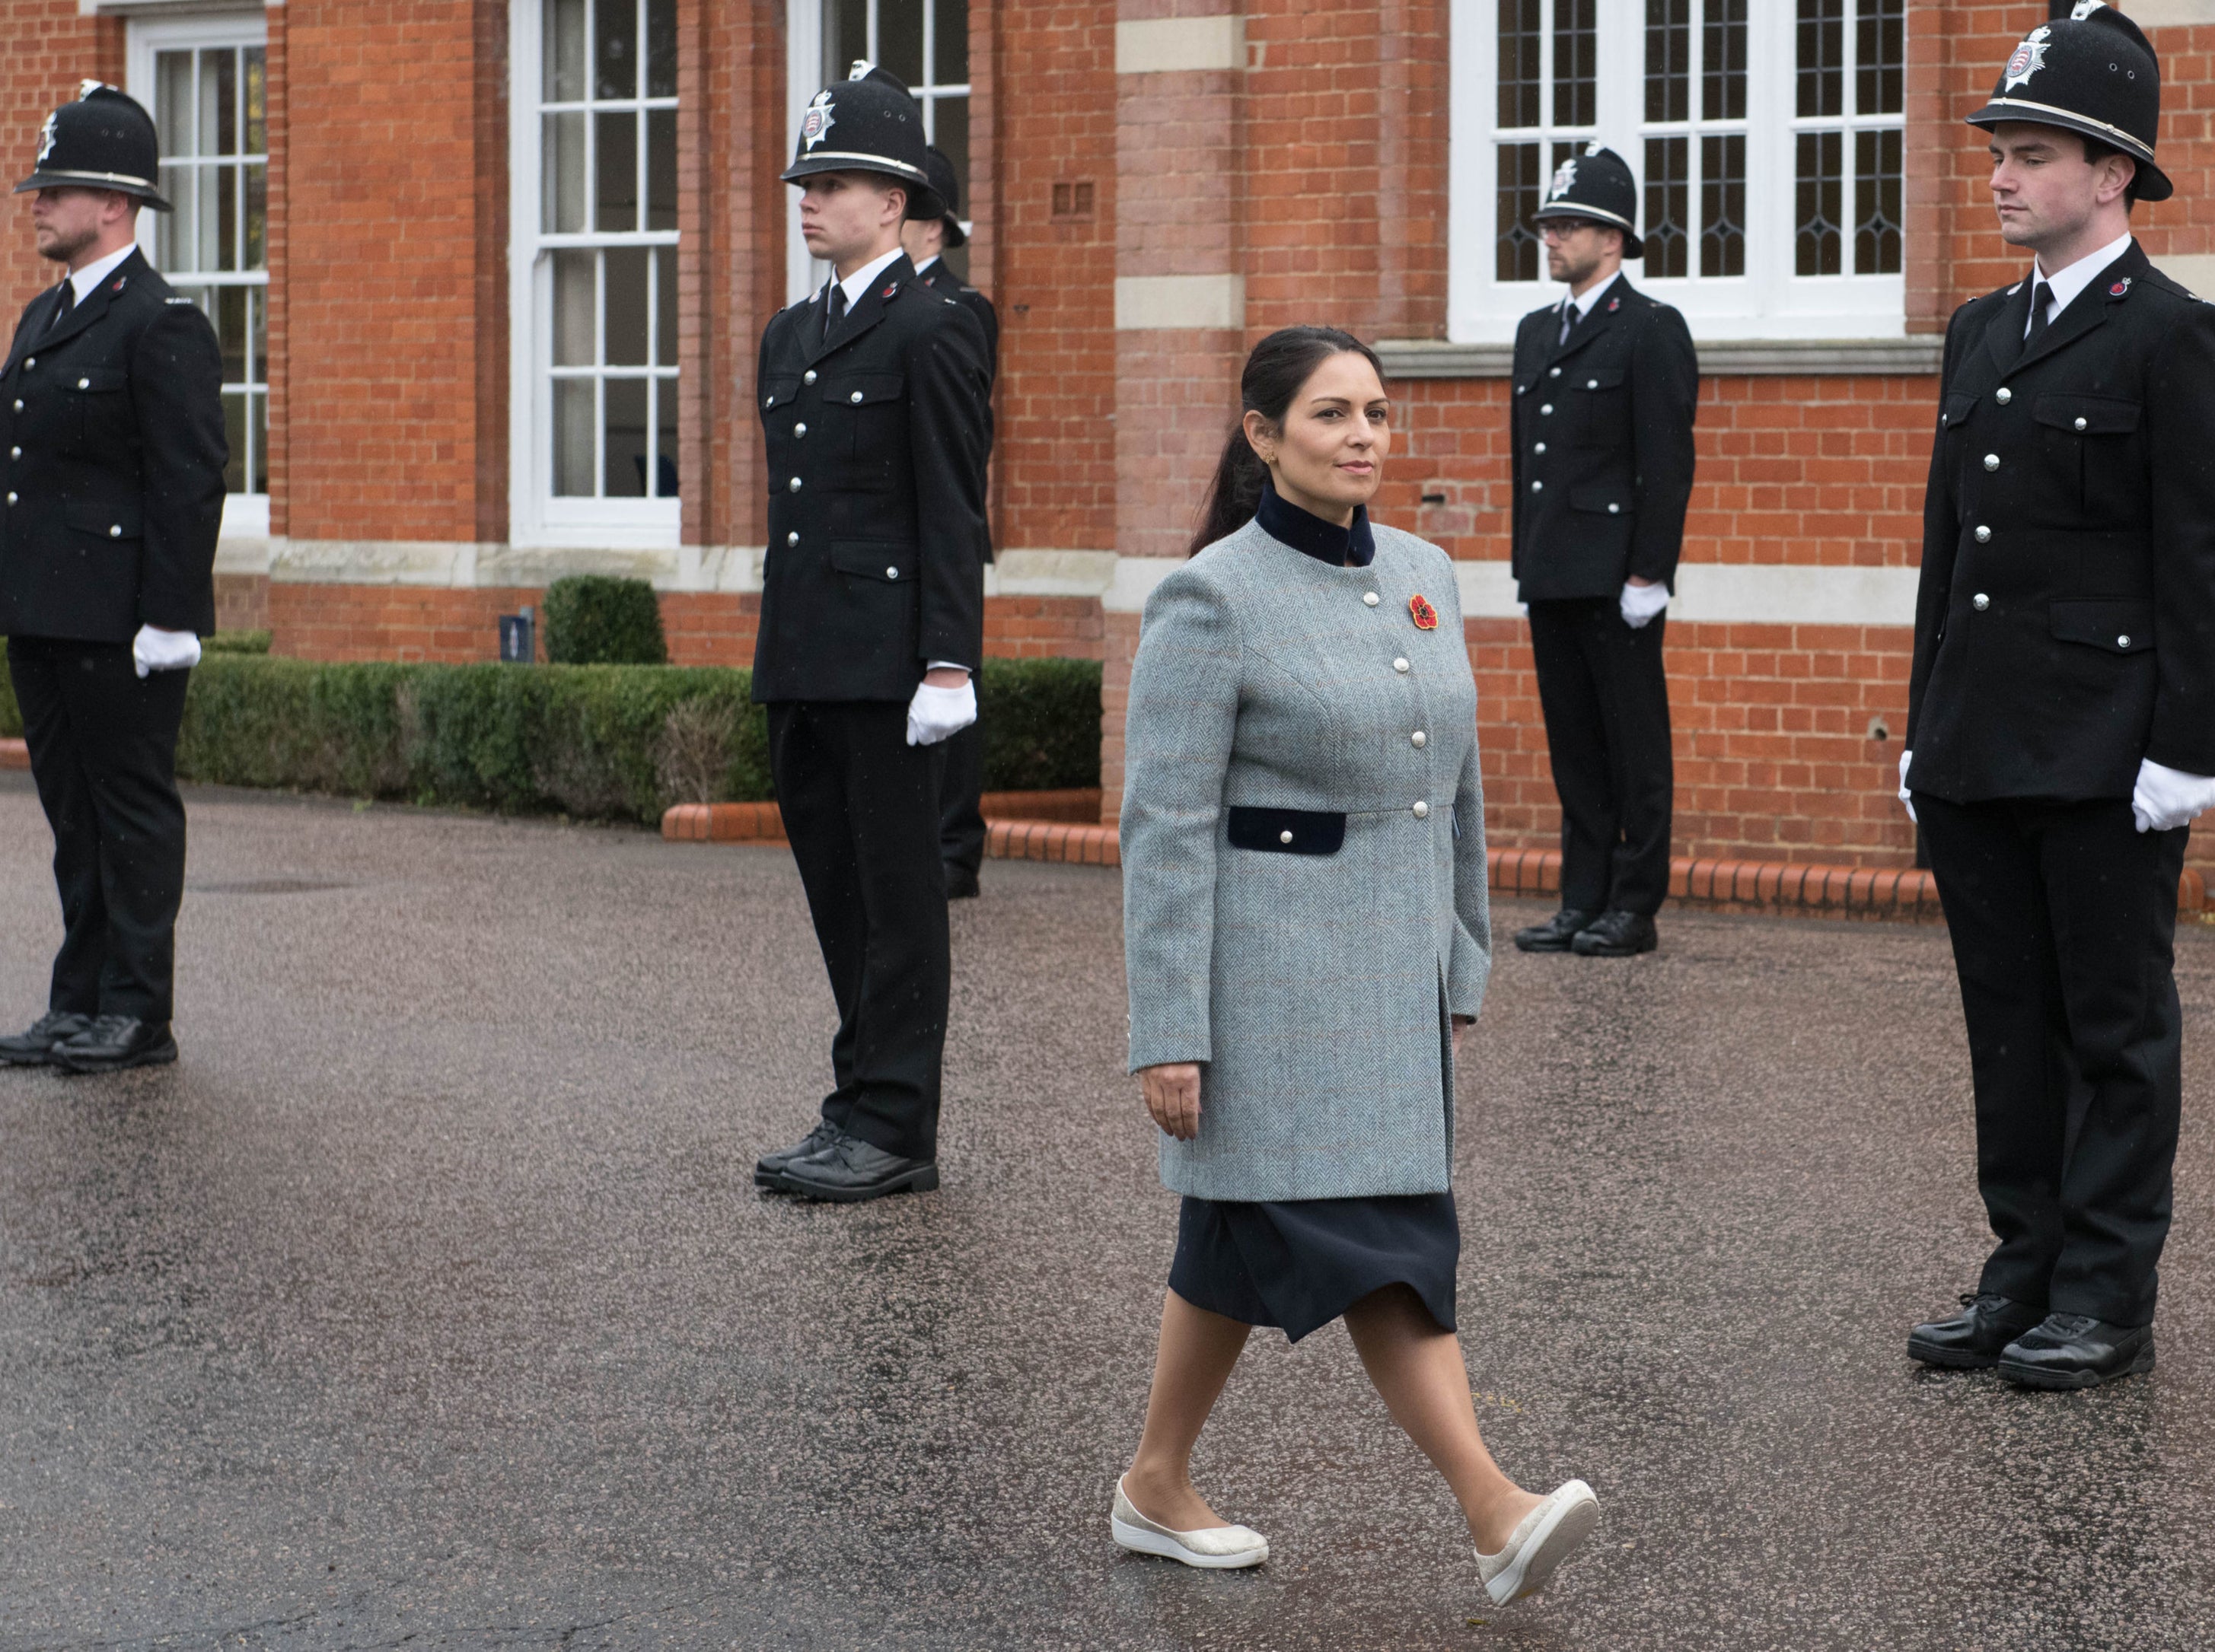 Home Secretary Priti Patel inspecting new police recruits at a passing out parade at Essex Police Headquarters in Chelmsford.